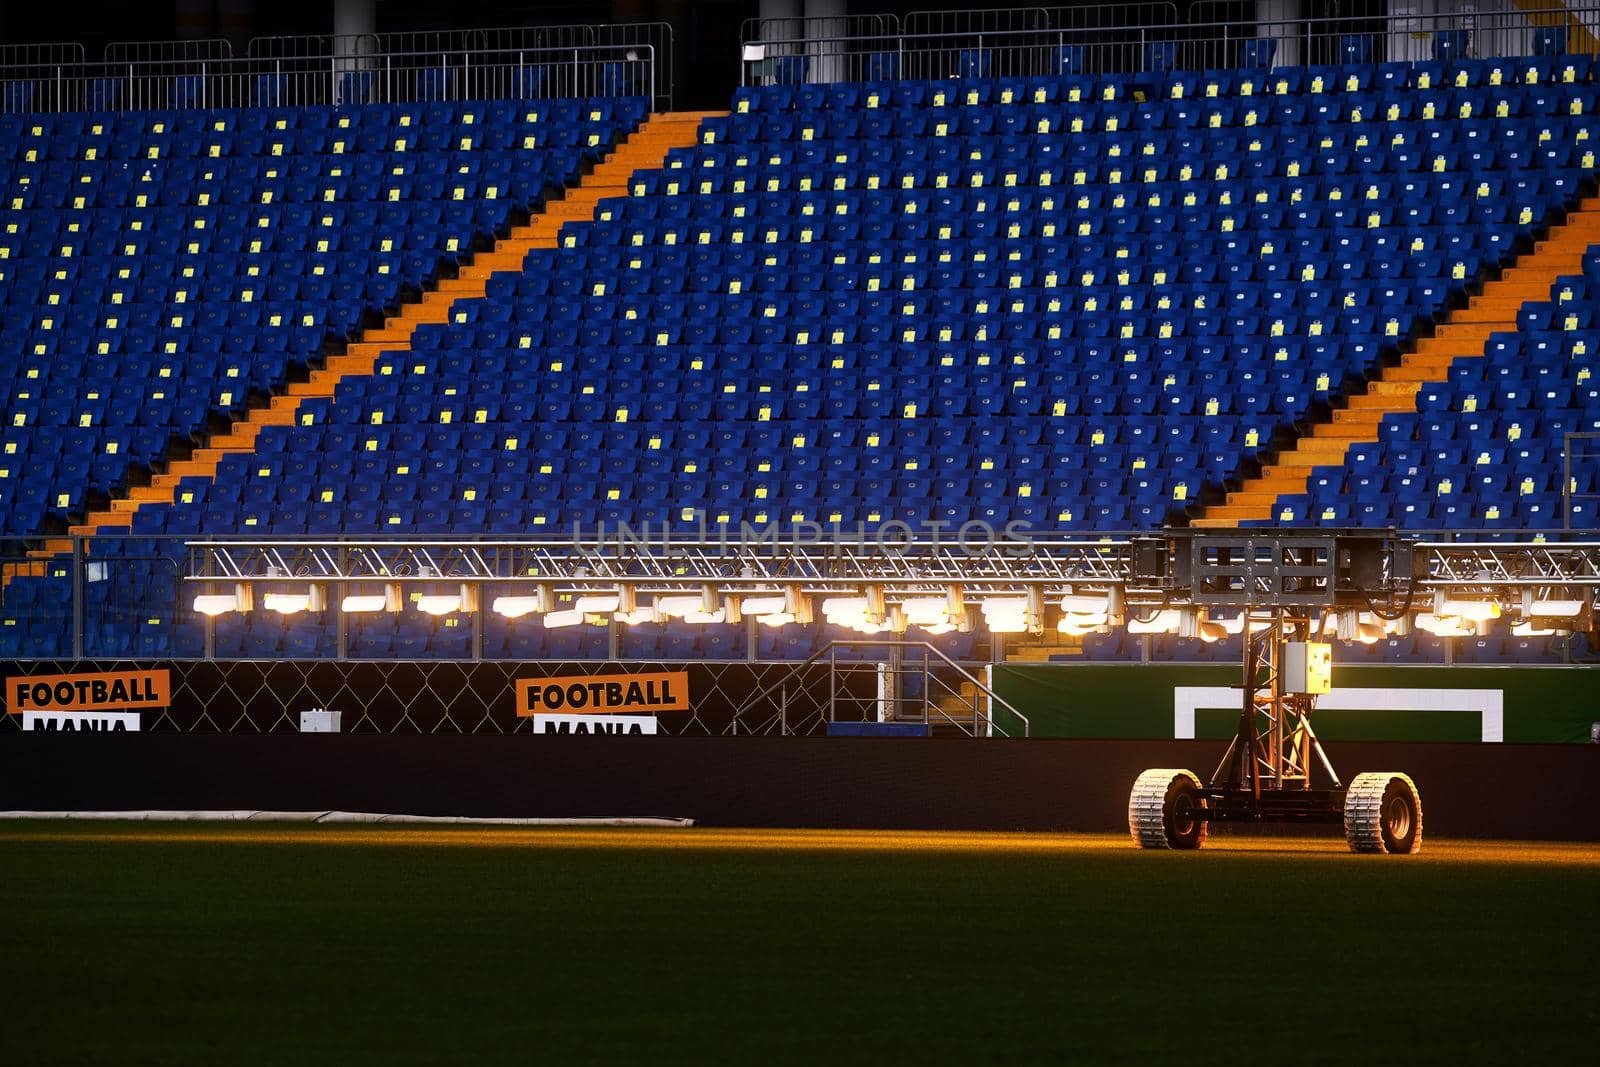 Artificial light system for growing football stadiums grass. Lamps to heat the lawn of the stadium and keep the grass in perfect condition. Lamps for football lawn.